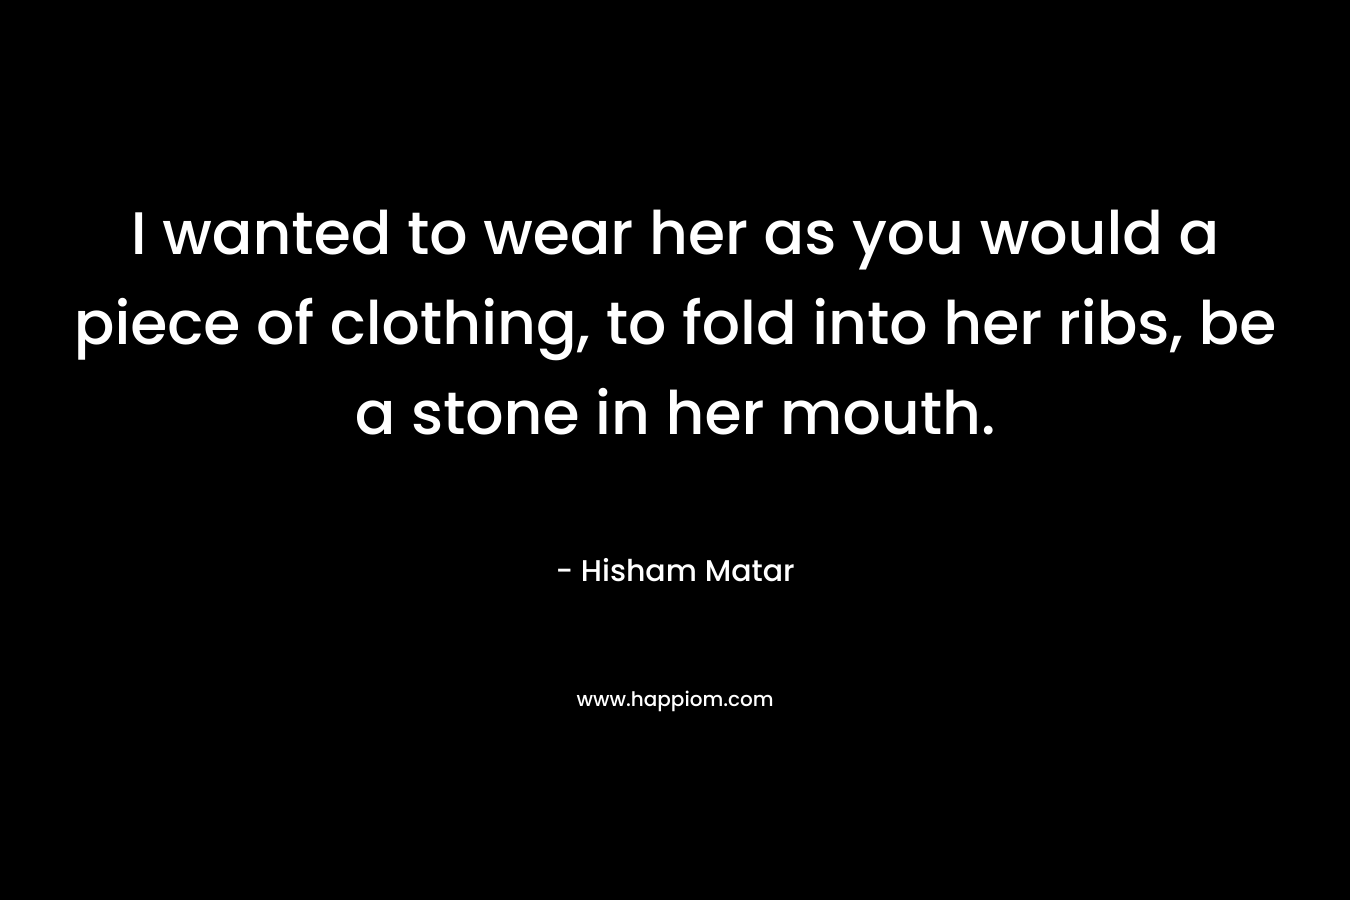 I wanted to wear her as you would a piece of clothing, to fold into her ribs, be a stone in her mouth. – Hisham Matar